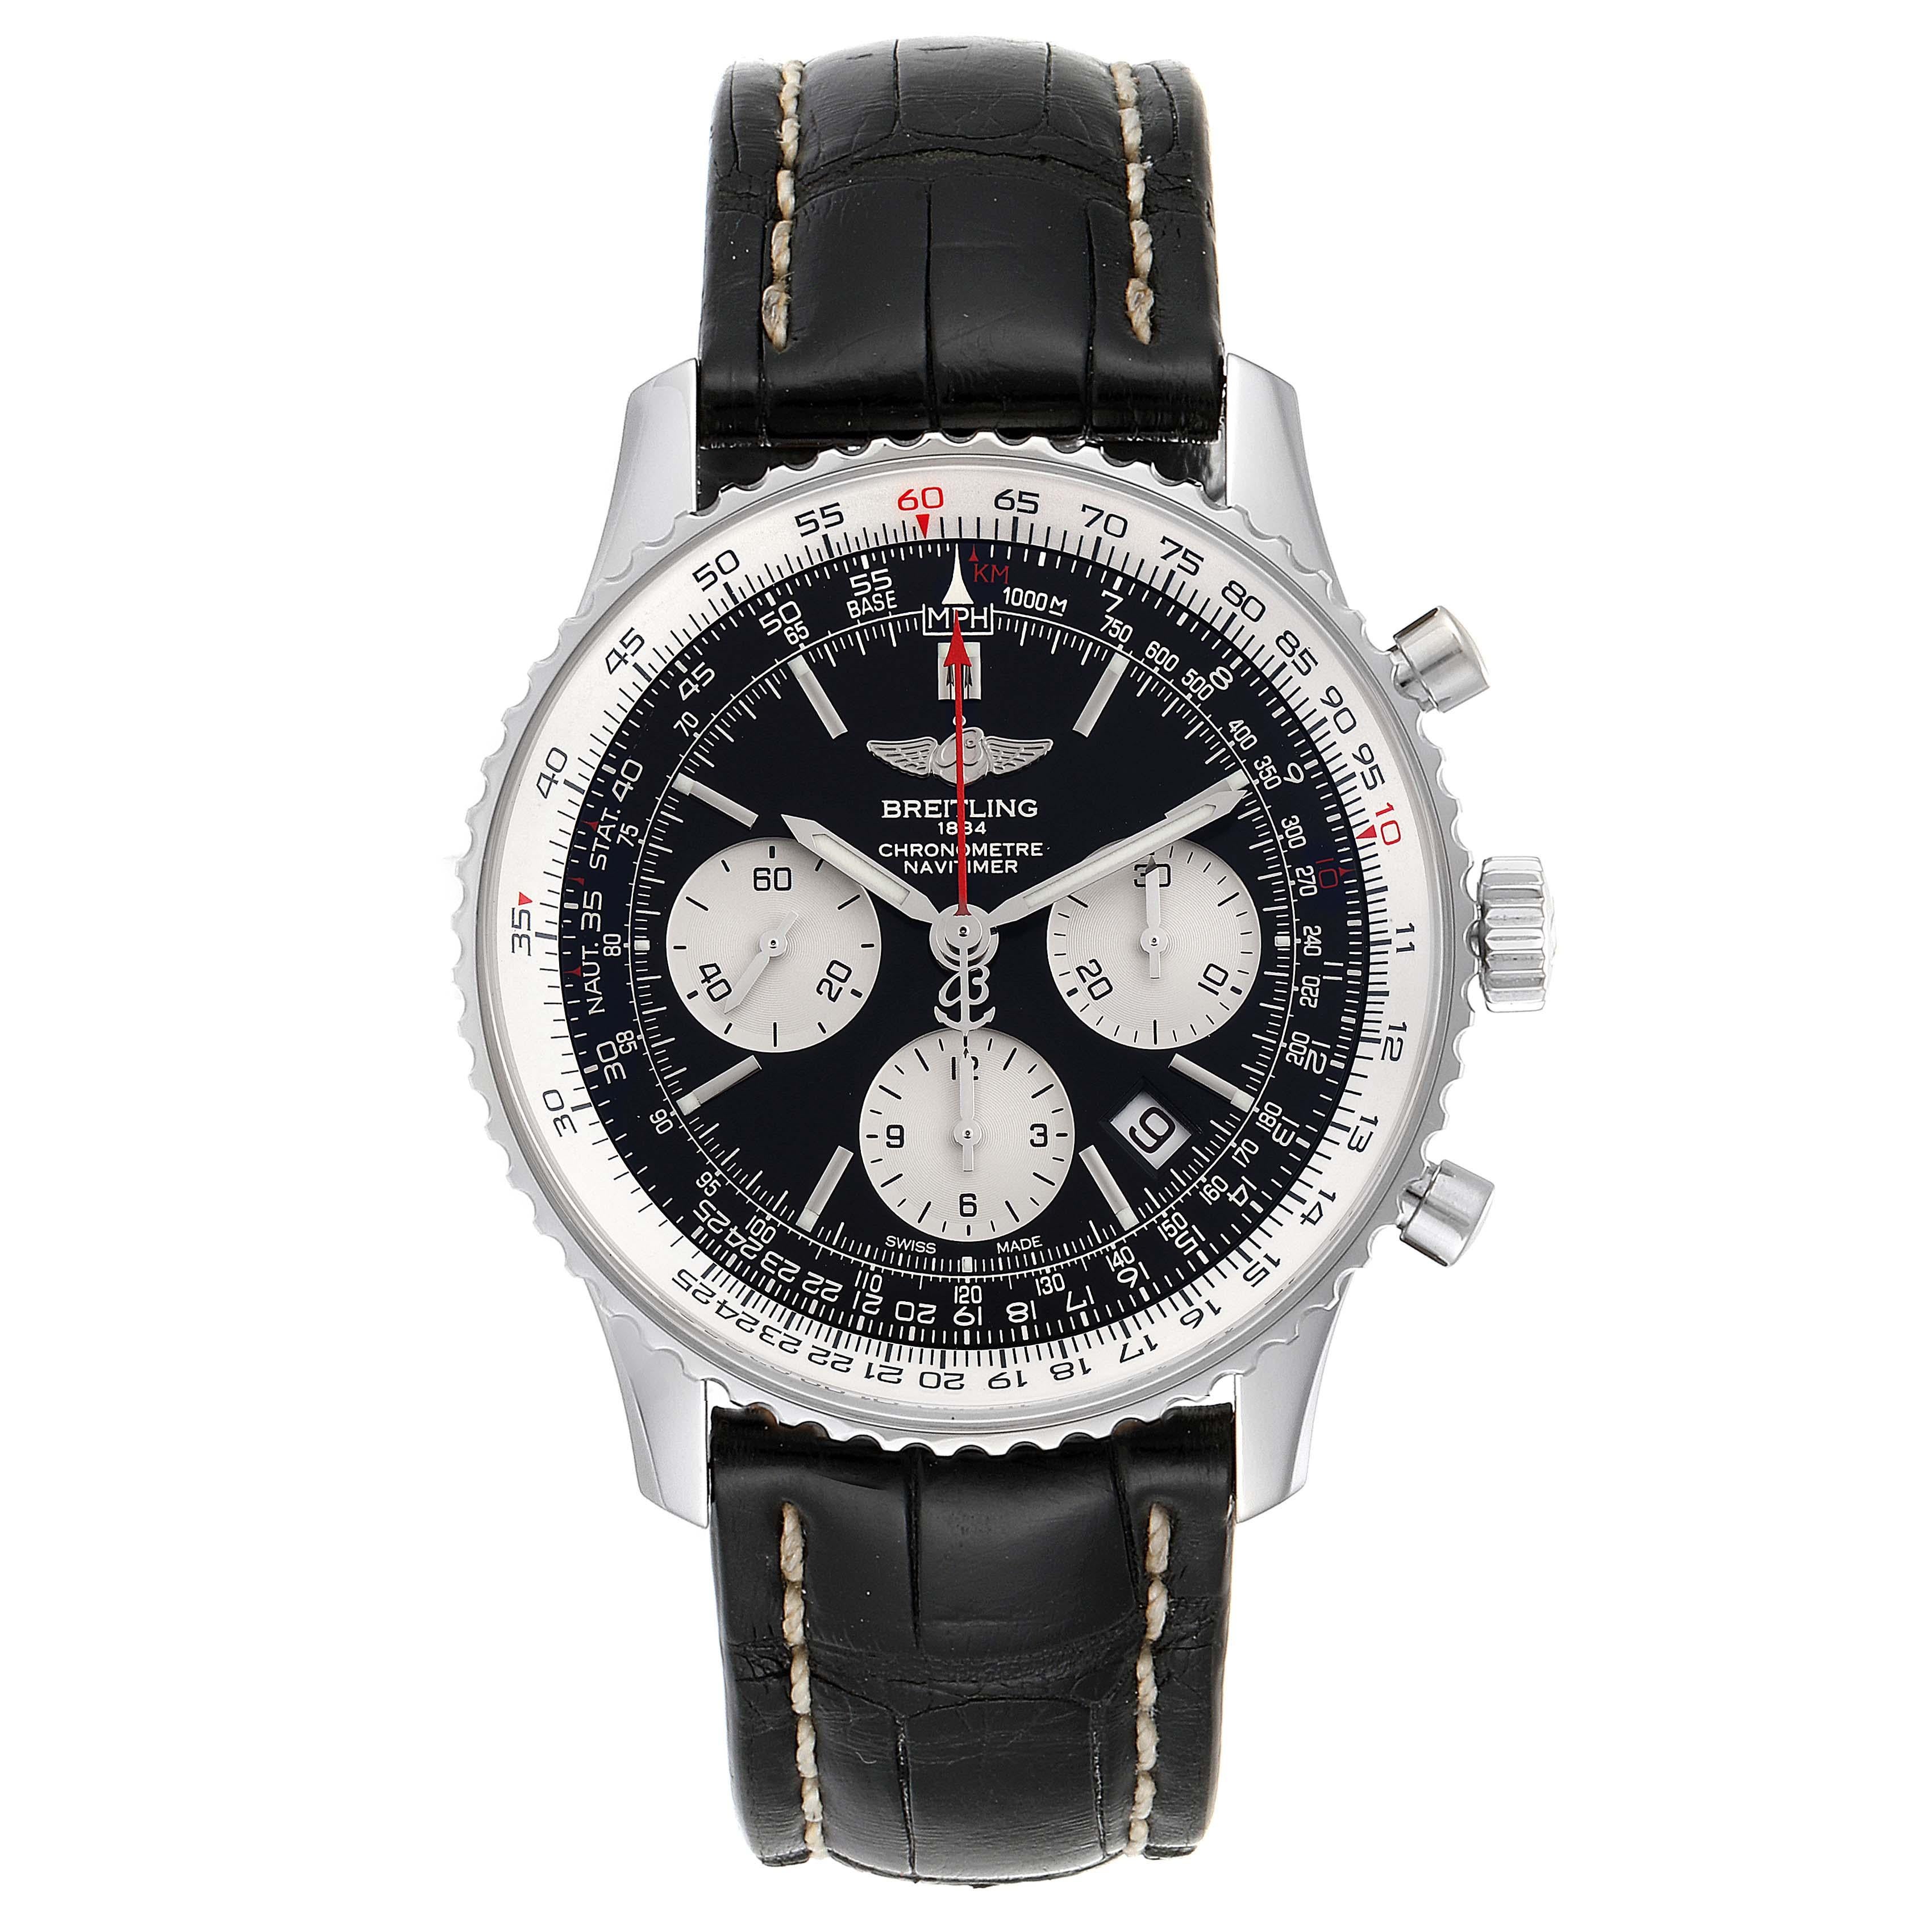 Breitling Navitimer 01 Black Dial Steel Mens Watch AB0121 Box Papers. Self-winding automatic officially certified chronometer movement. Chronograph function. Stainless steel case 43 mm in diameter. Case thickness 14.25 mm. Transparrent exhibition